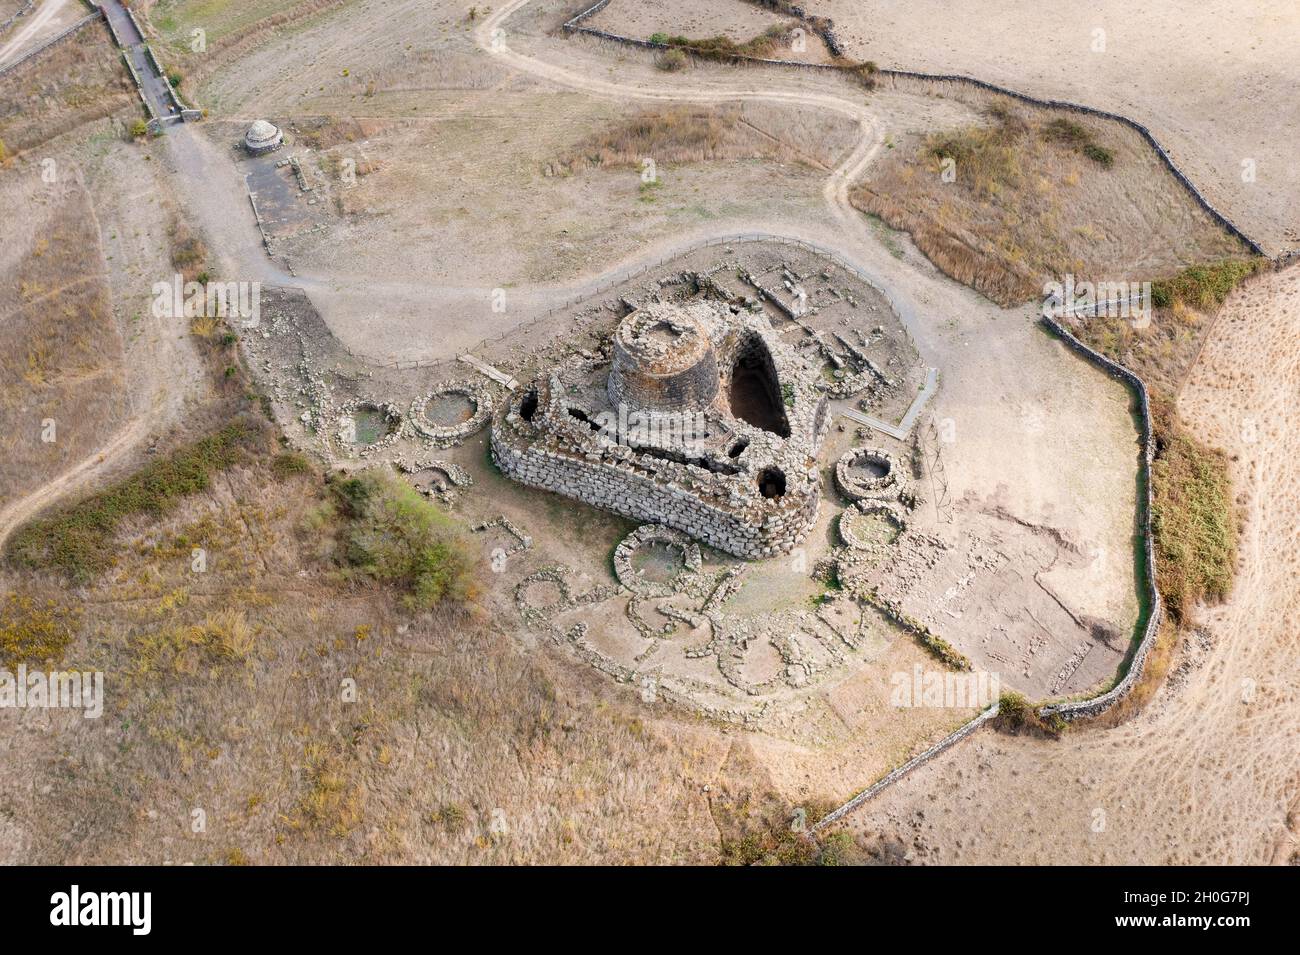 View from above, stunning aerial view of the ancient Santu Antine Nuraghe. Santu Antine Nuraghe is one of the largest Nuraghi in Sardinia, Italy. Stock Photo